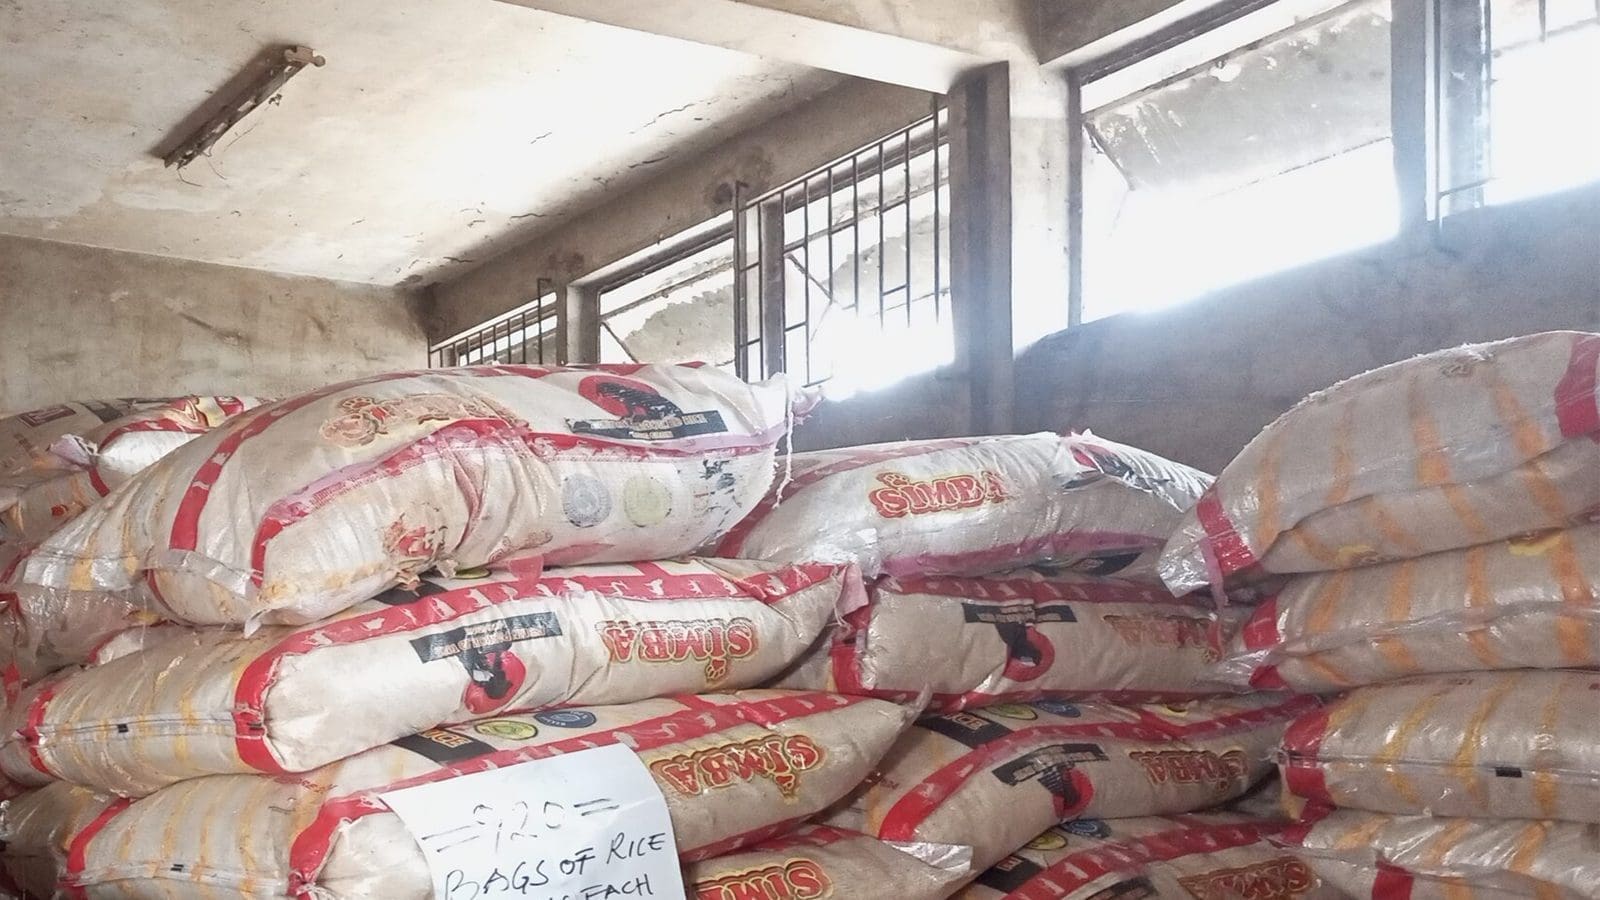 FDA Ghana seizes imported rice from India suspected to be contaminated with lead